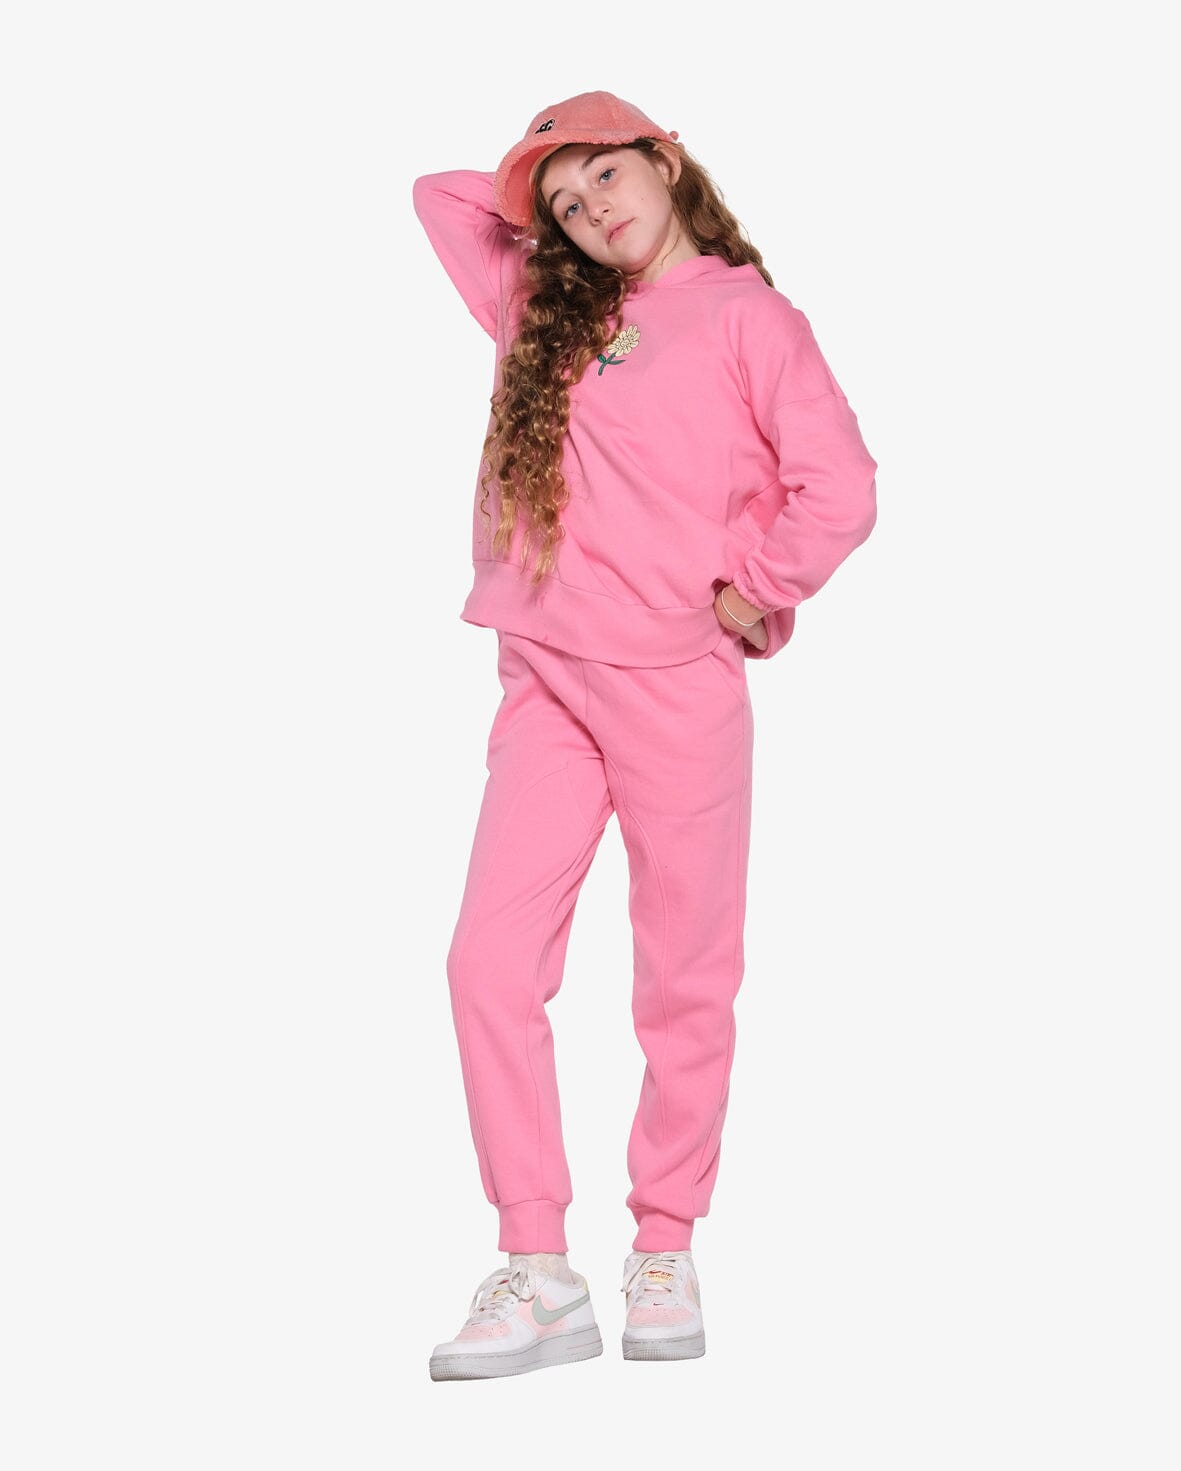 The Girl Club - Candy Pink Fleece Joggers - Candy Pink Girls The Girl Club